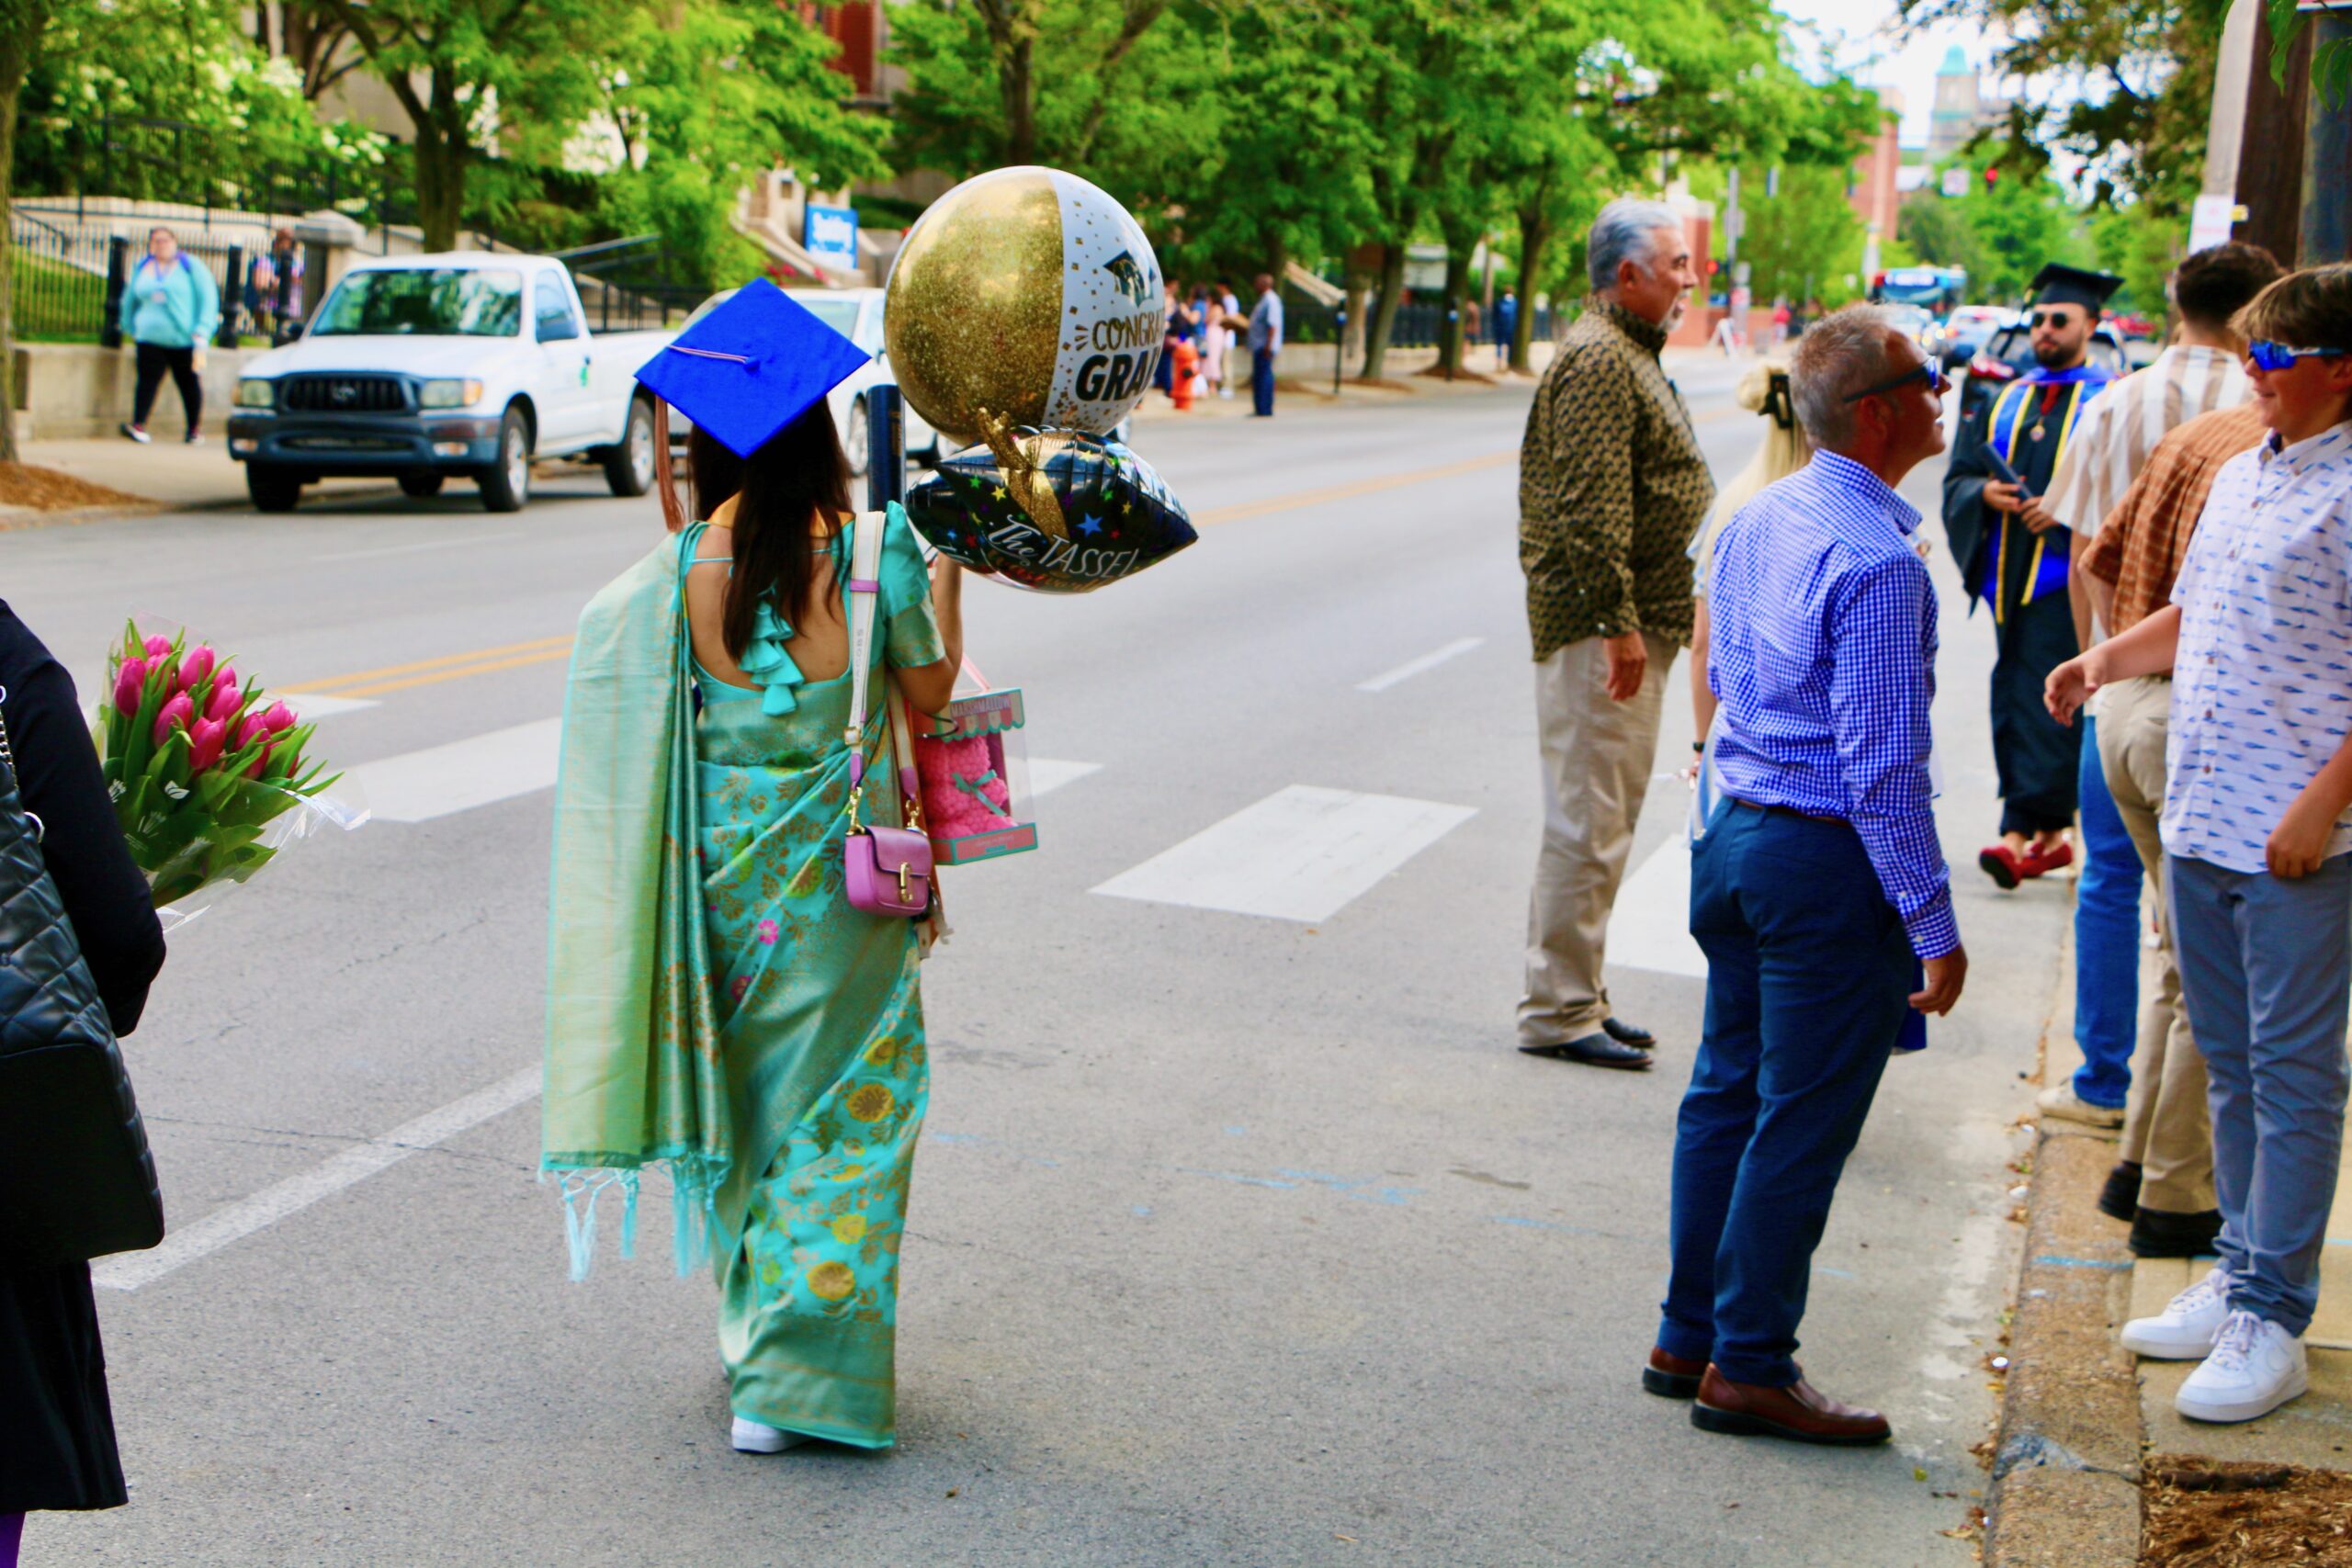 Spalding bachelor's graduate walking away with balloons